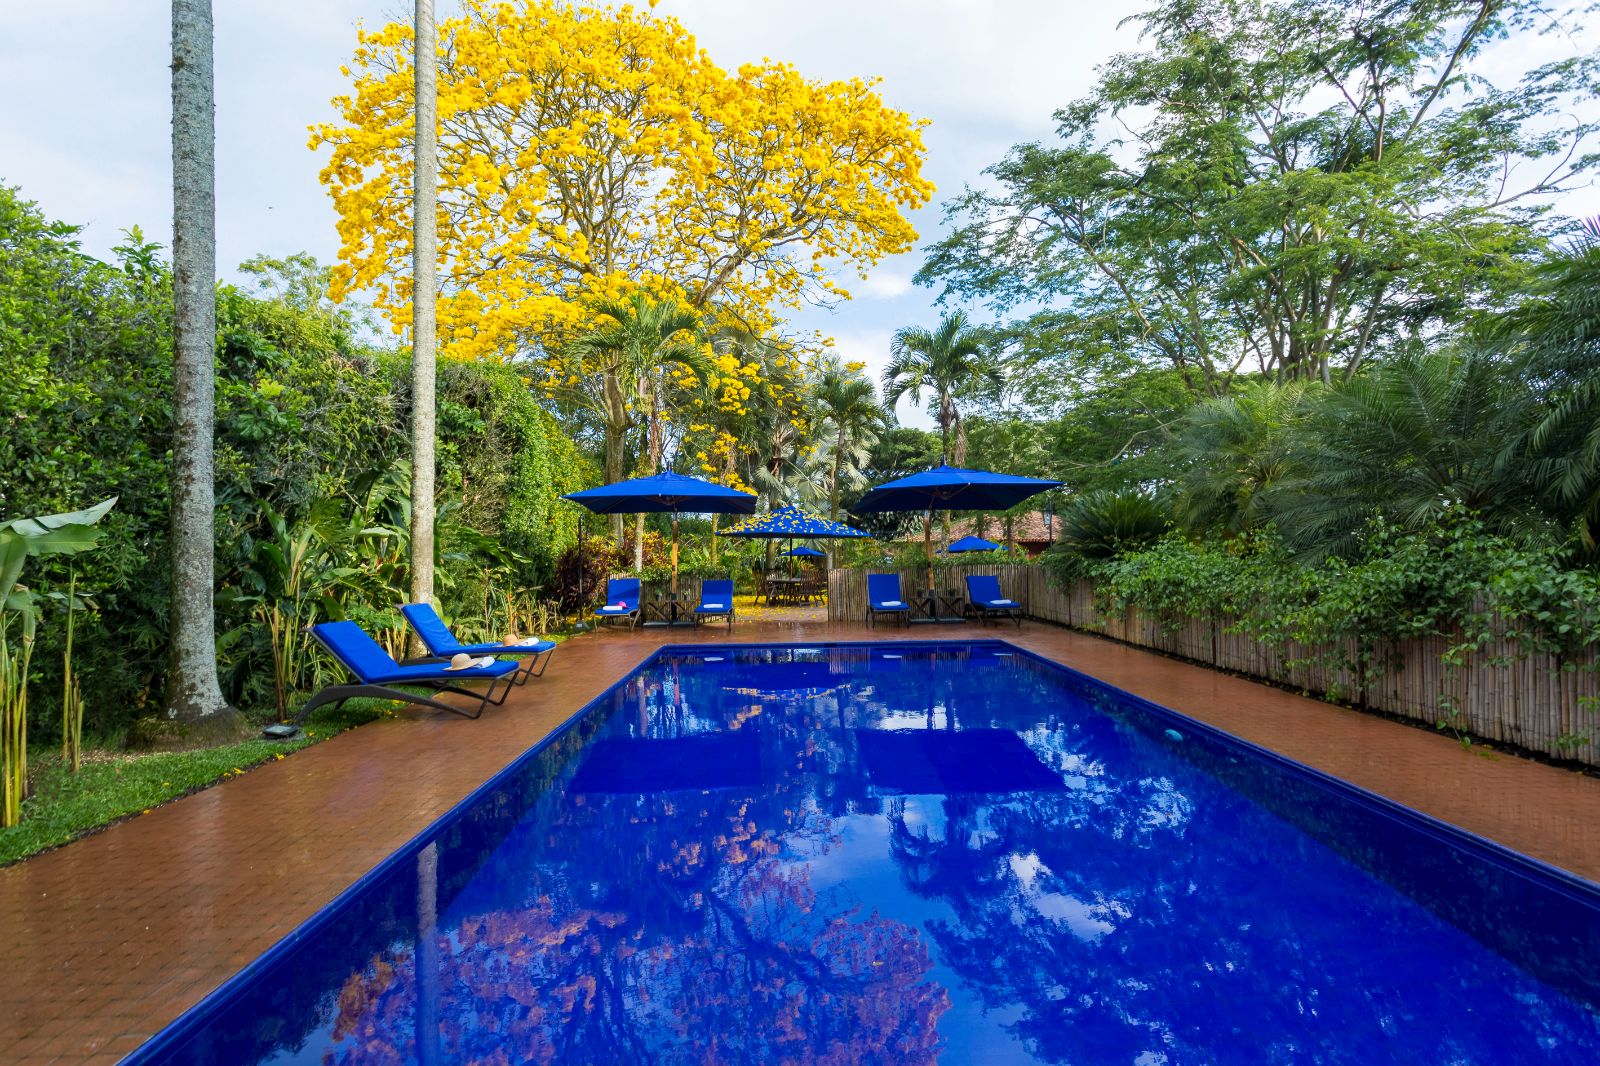 Poolside and sun loungers at Hotel Boutique Sazagua in Colombia's coffee region